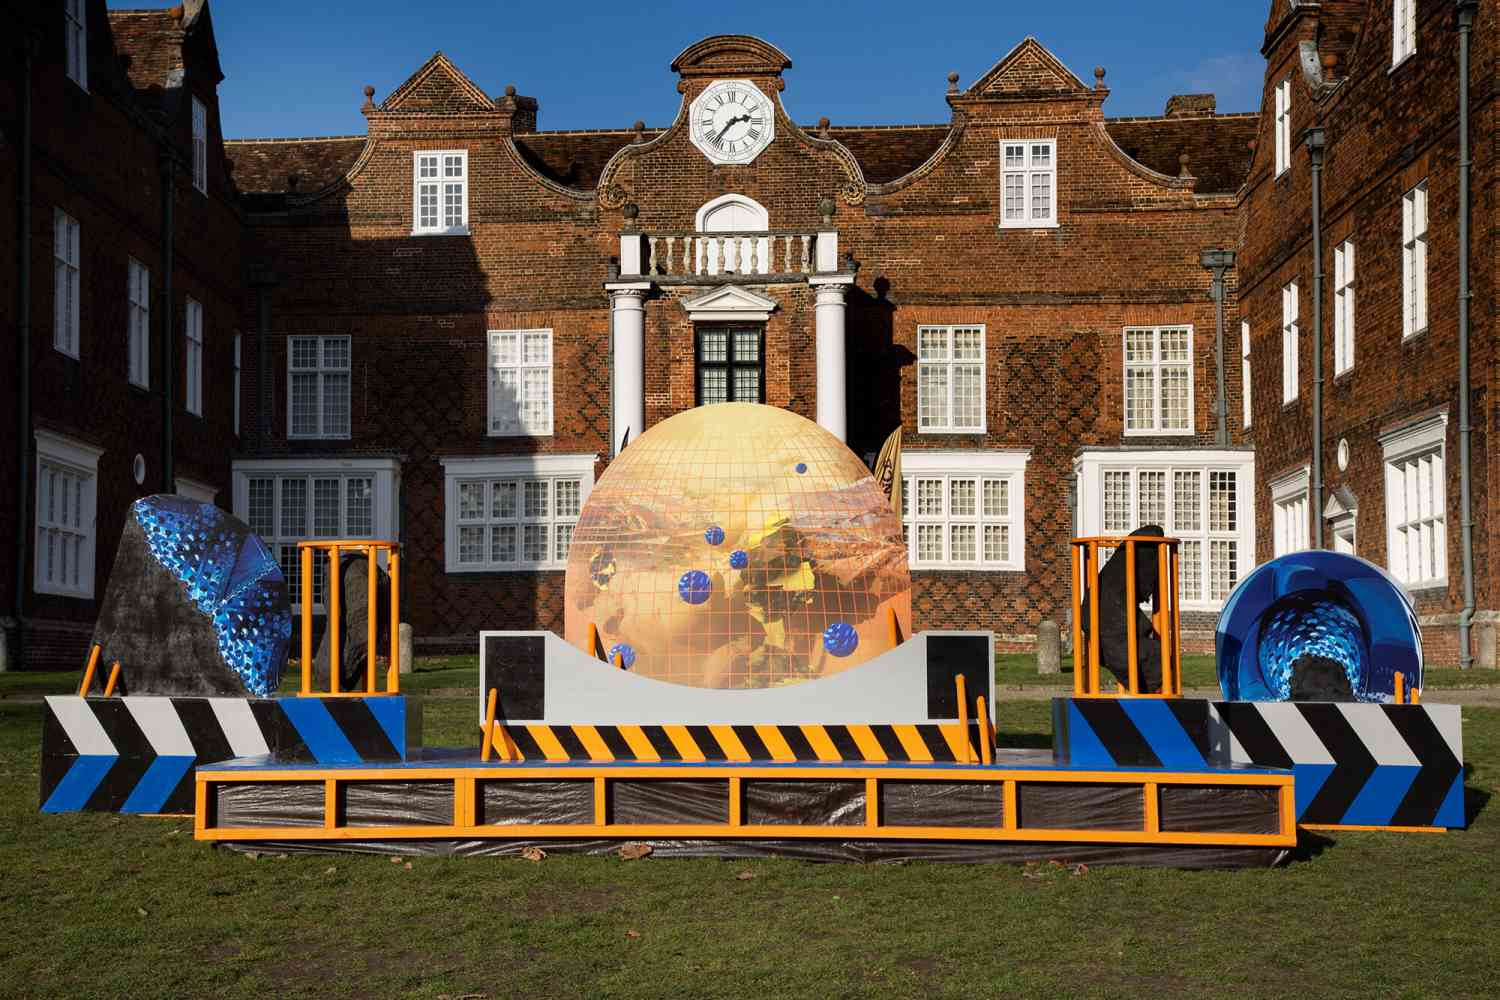 Power Surge - Installation view, public artwork commissioned by Colchester and Ipswich Museum